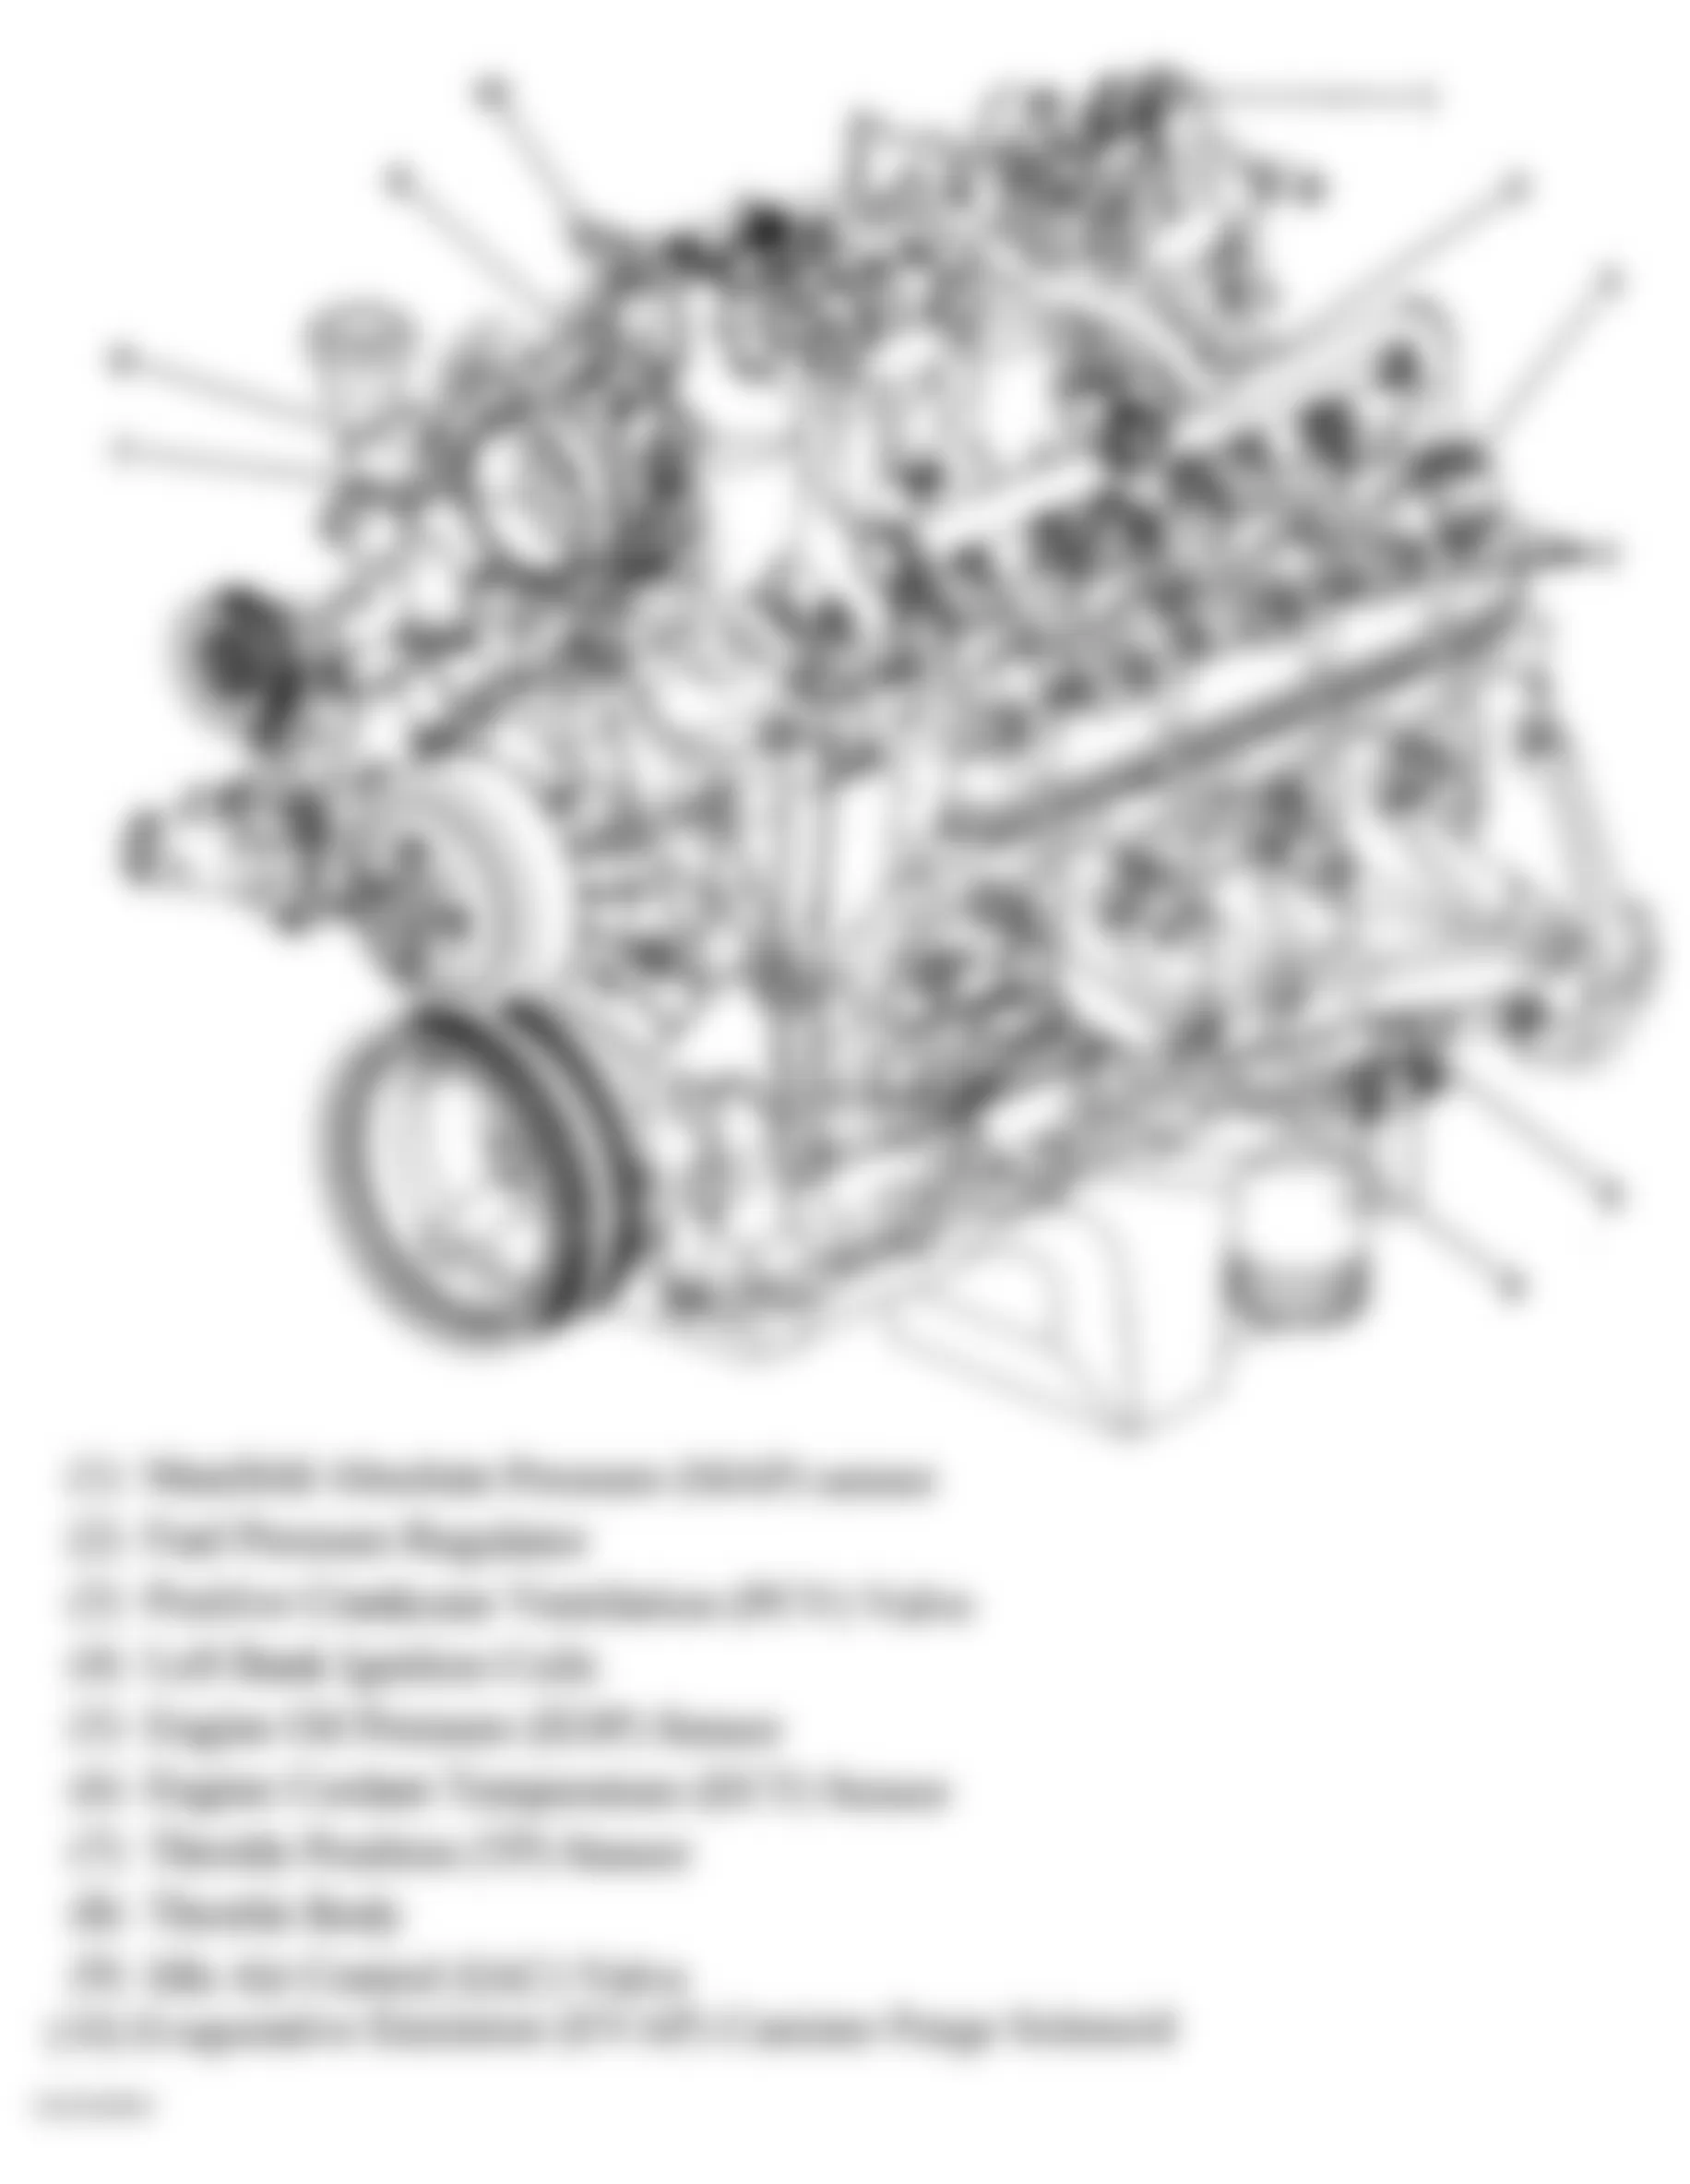 GMC Sierra 1500 2004 - Component Locations -  Left Front Of Engine (4.8L, 5.3L & 6.0L)